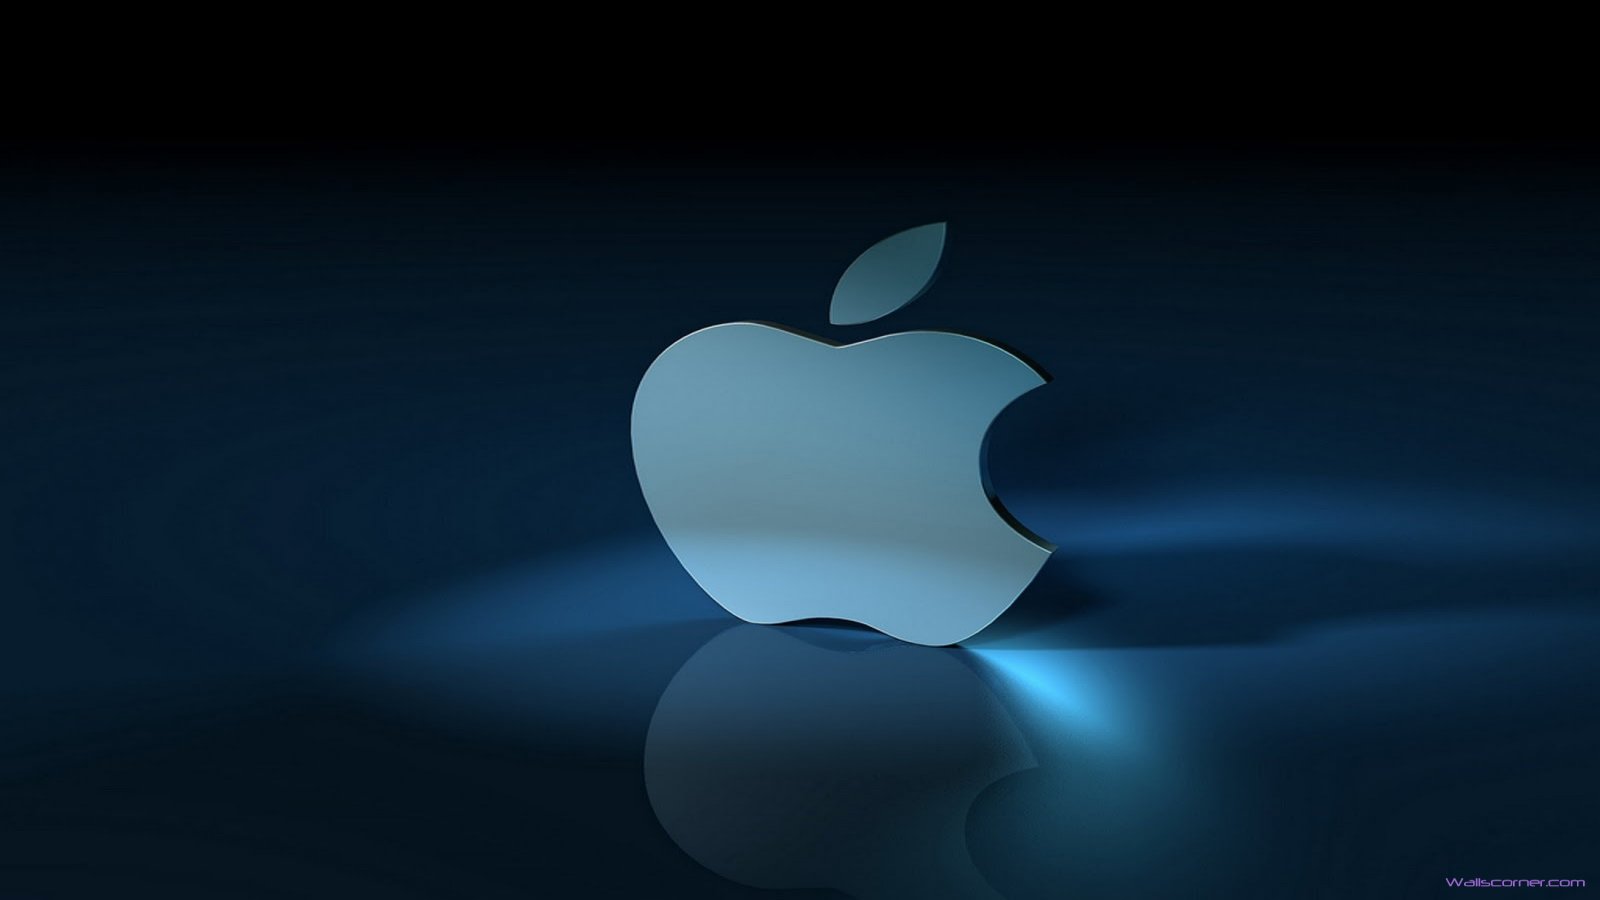 All Other Resolutions Of Apple 3d Logo Wallpaper Or